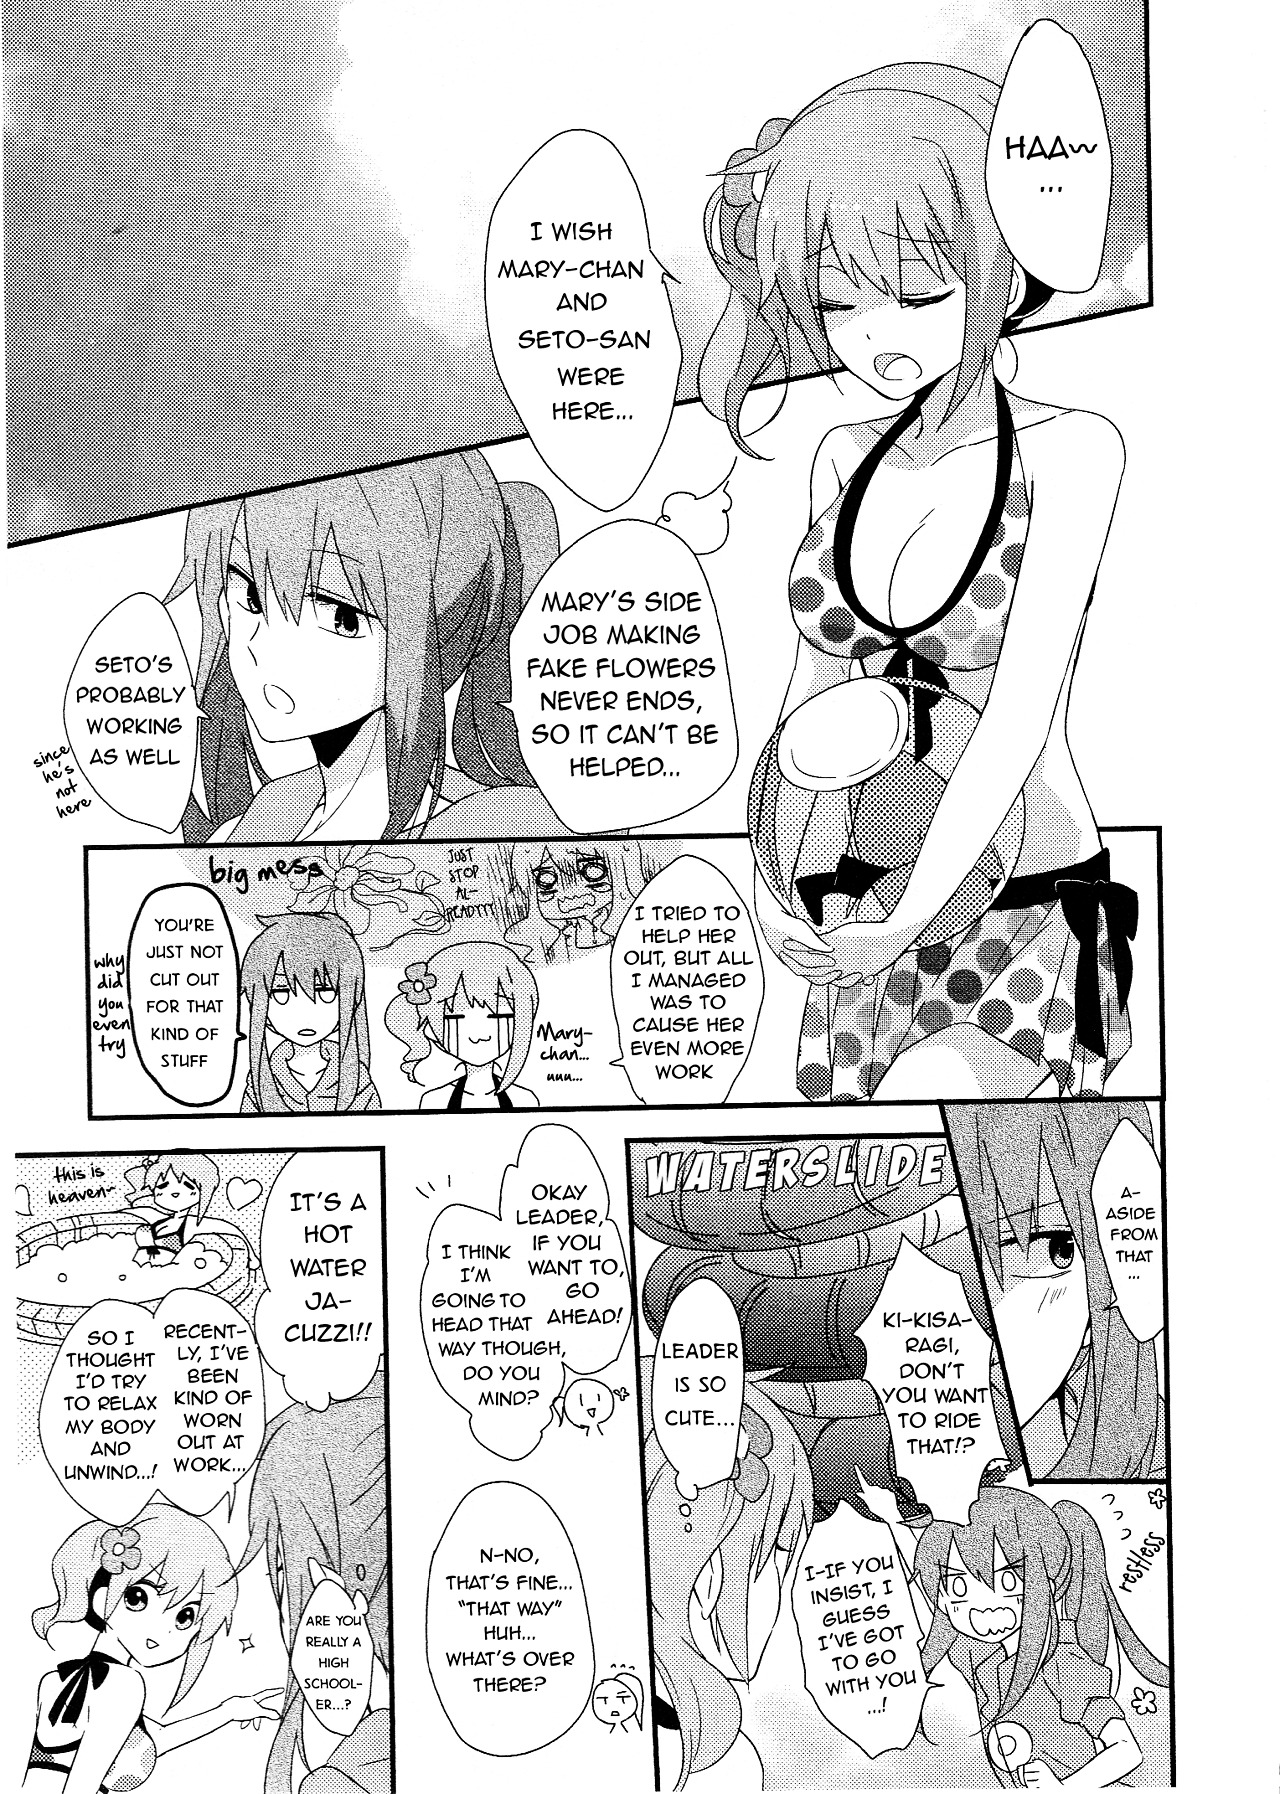 Kagerou Daze Official Anthology Comic -Summer- Vol.1 Chapter 13 : Mekakushi Summer Vacation! By Wannyanpuu [End] - Picture 3